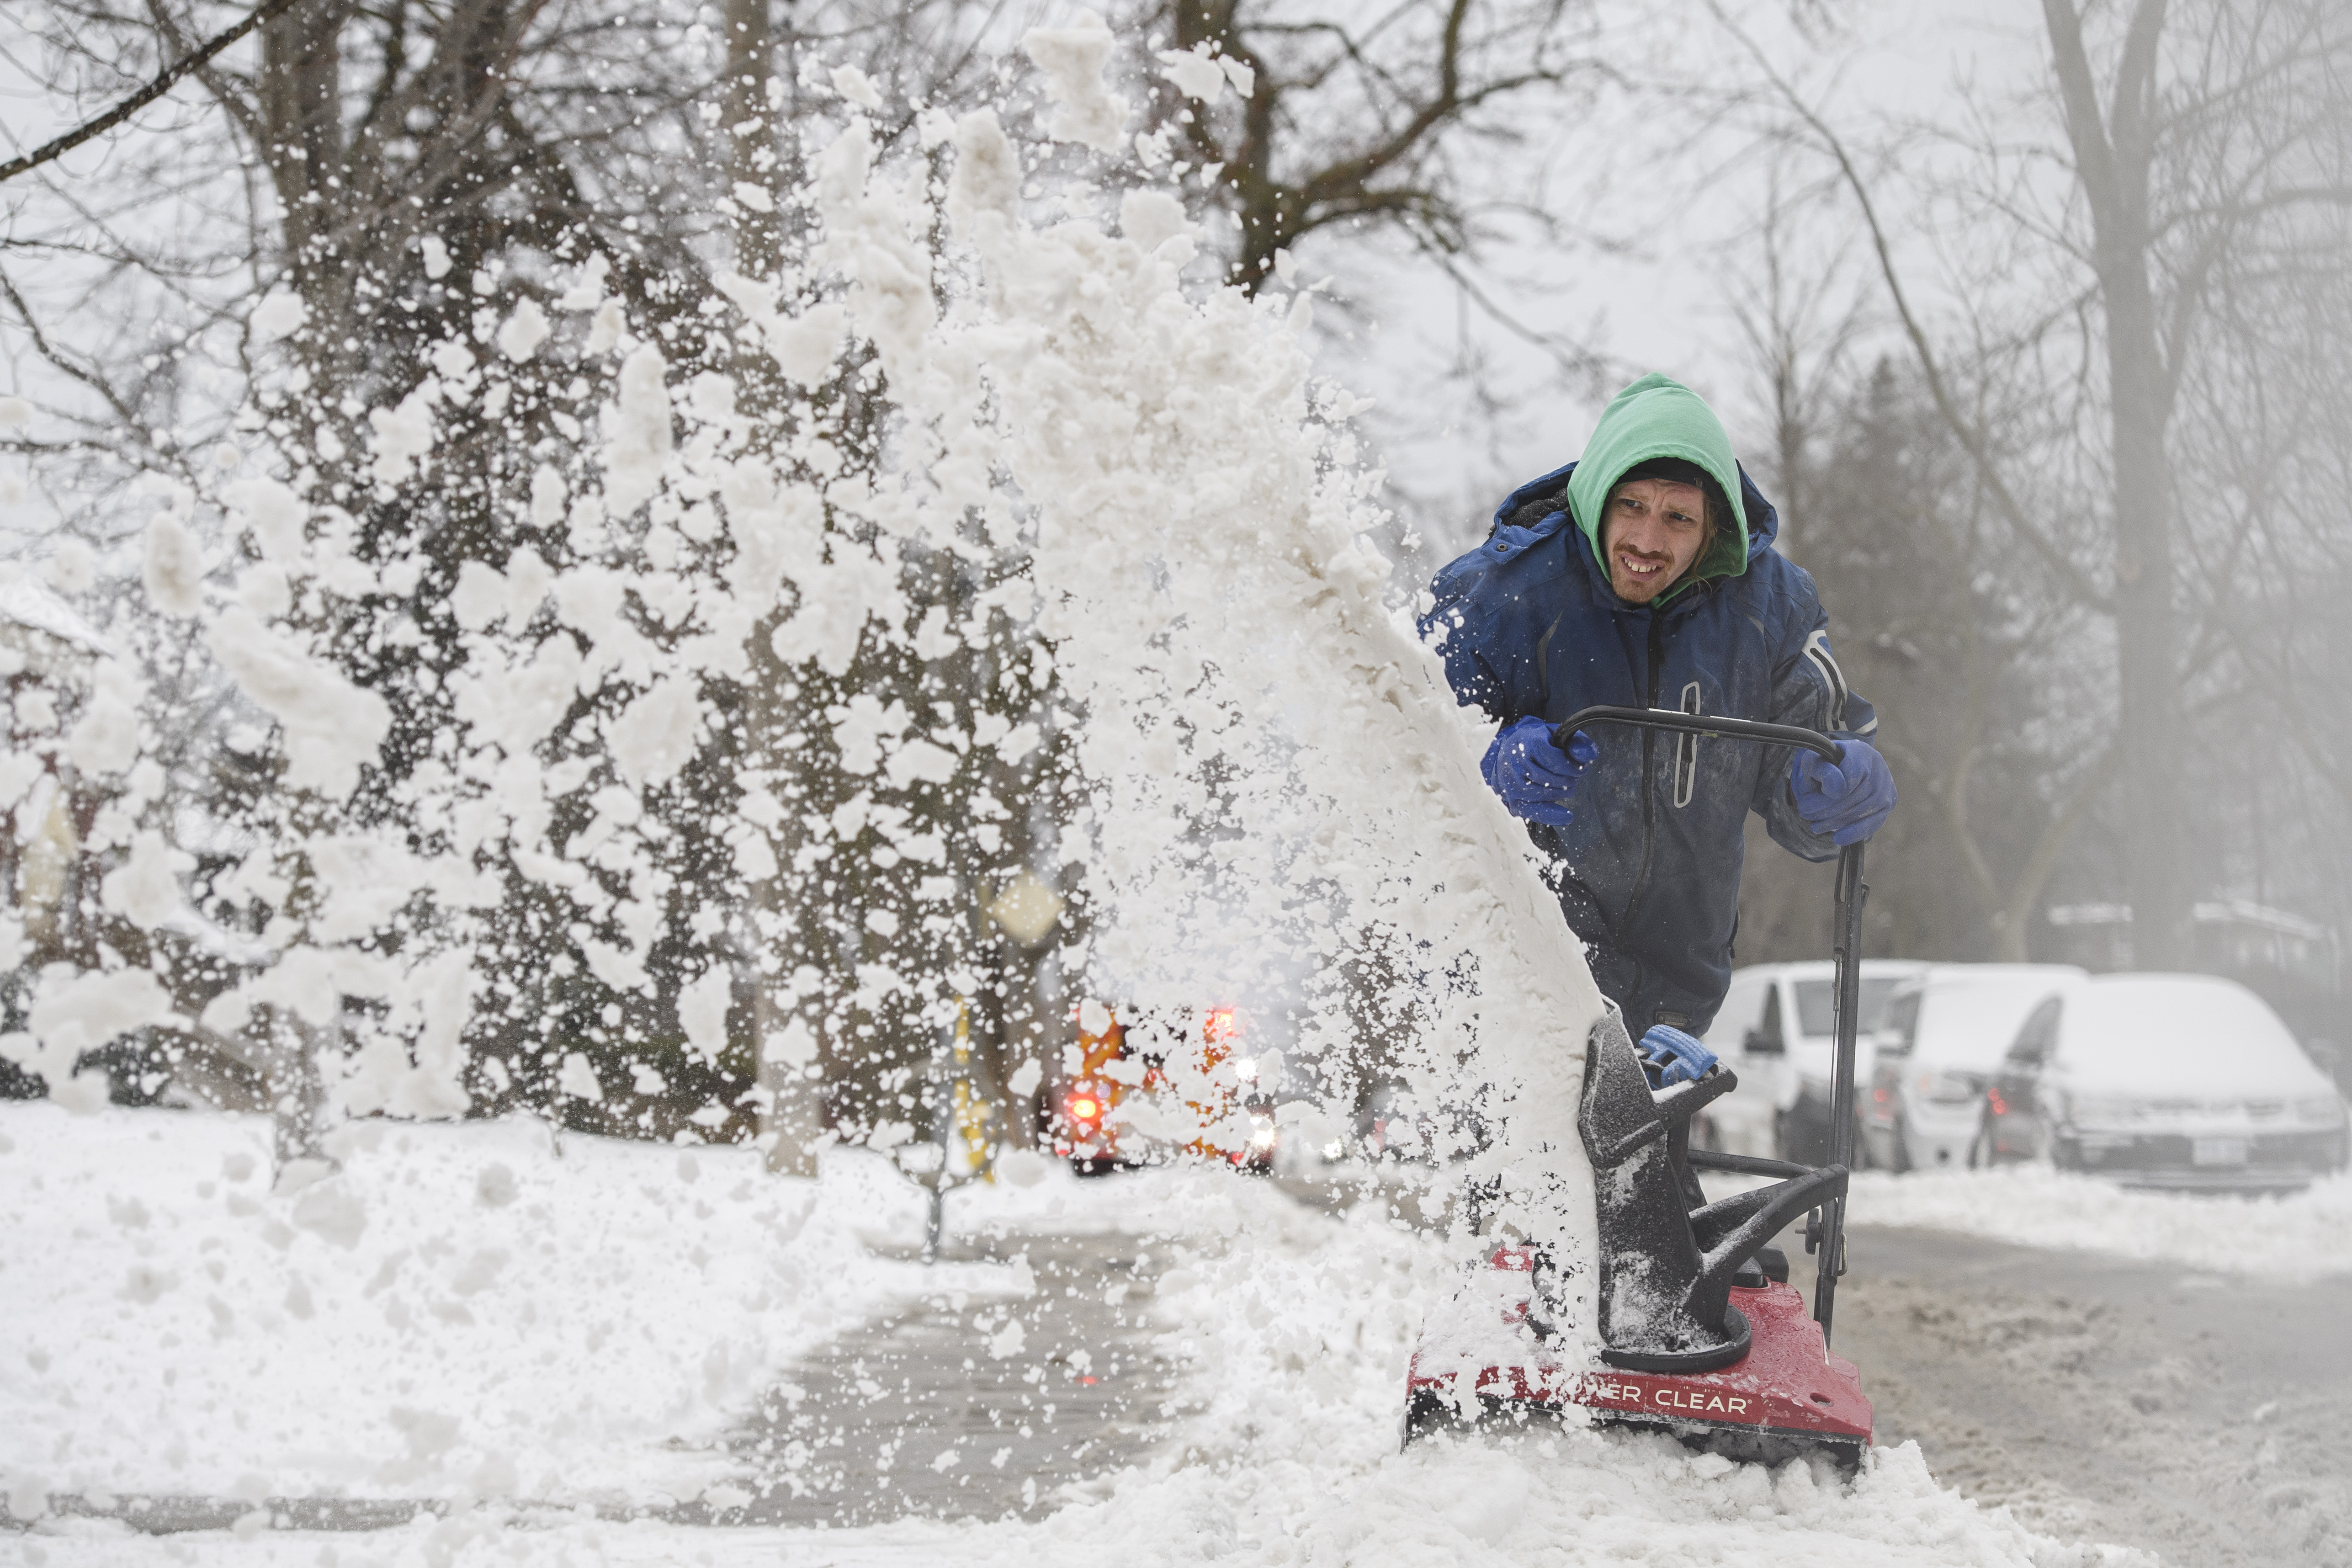 Extreme winter weather will hit Canada over the weekend. What to